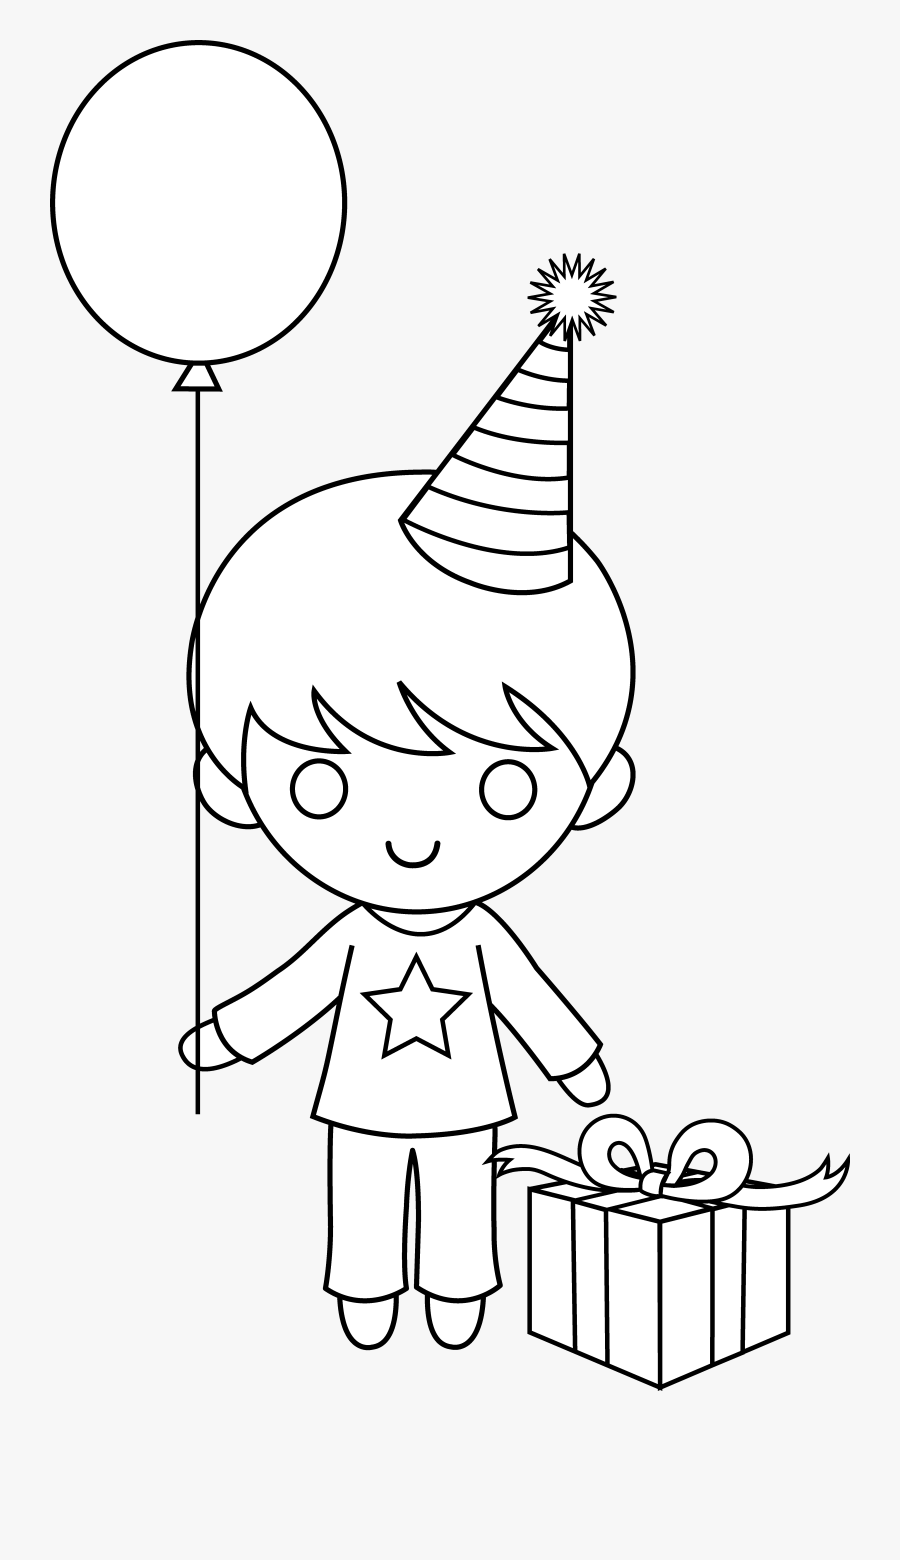 Birthday Boy Clipart Outline Easy Friendship Day Drawing Free Transparent Clipart Clipartkey Draw funny character teenager step hart christopher lesson. birthday boy clipart outline easy